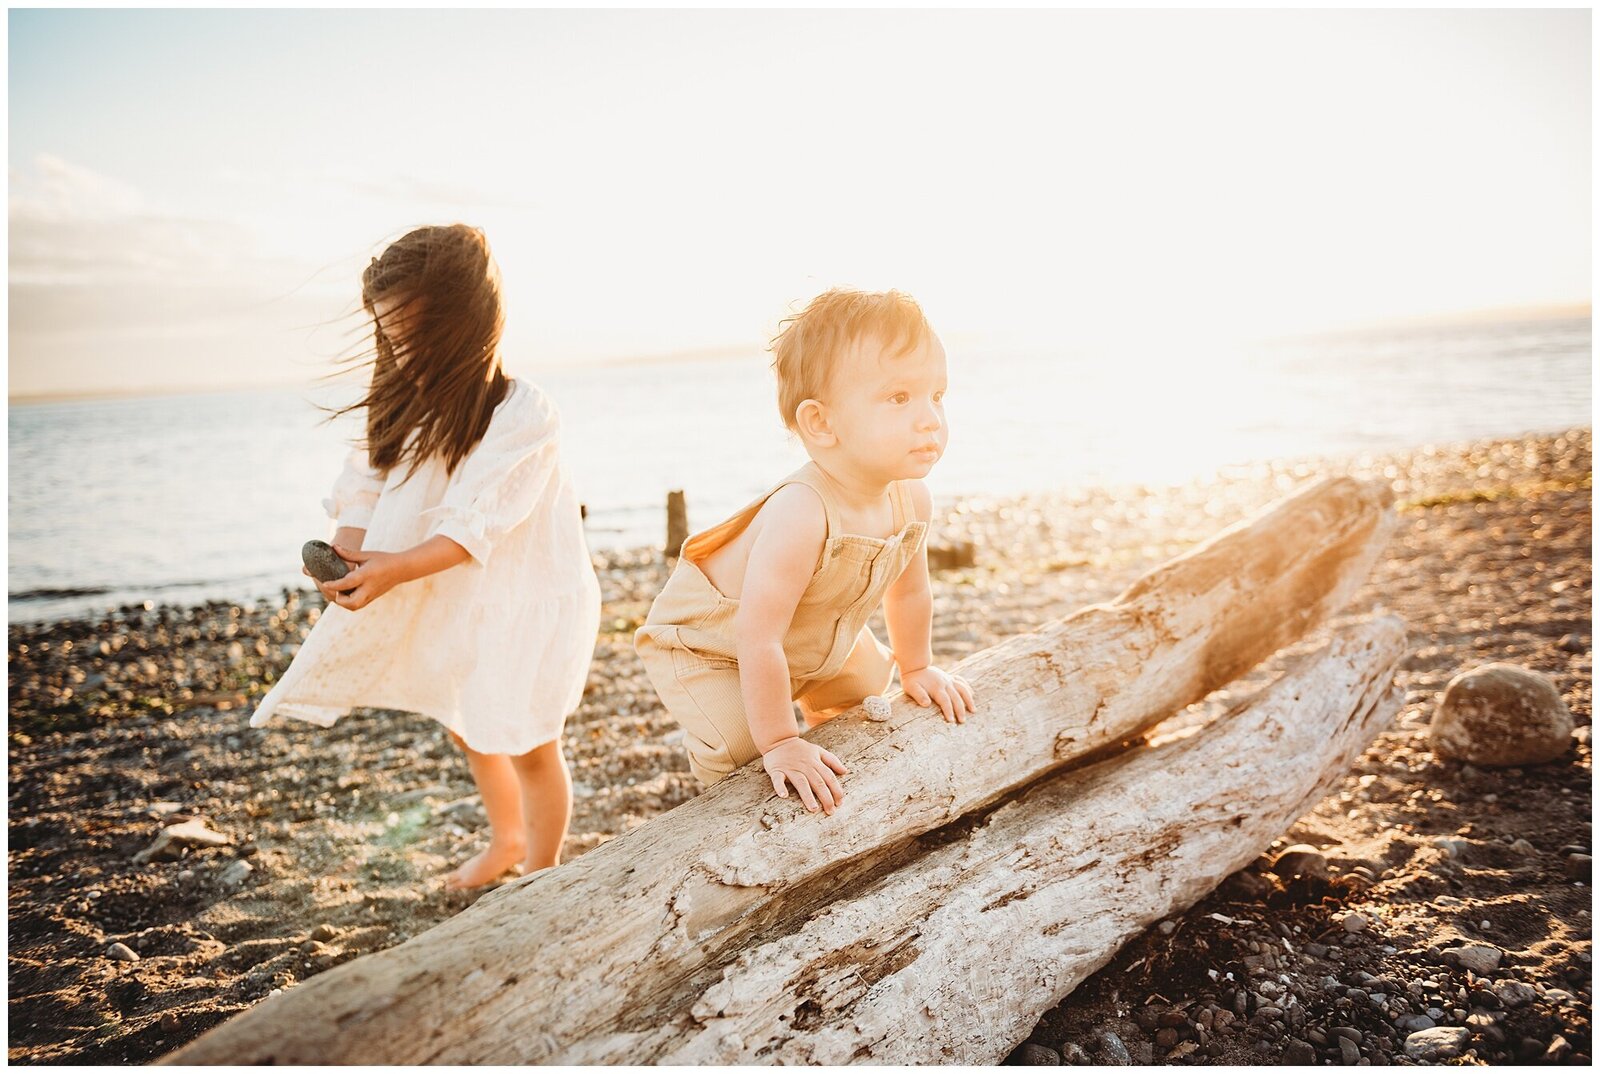 Two toddlers brother and sister play on beach at sunset Emily Ann Photography Seattle Photographer